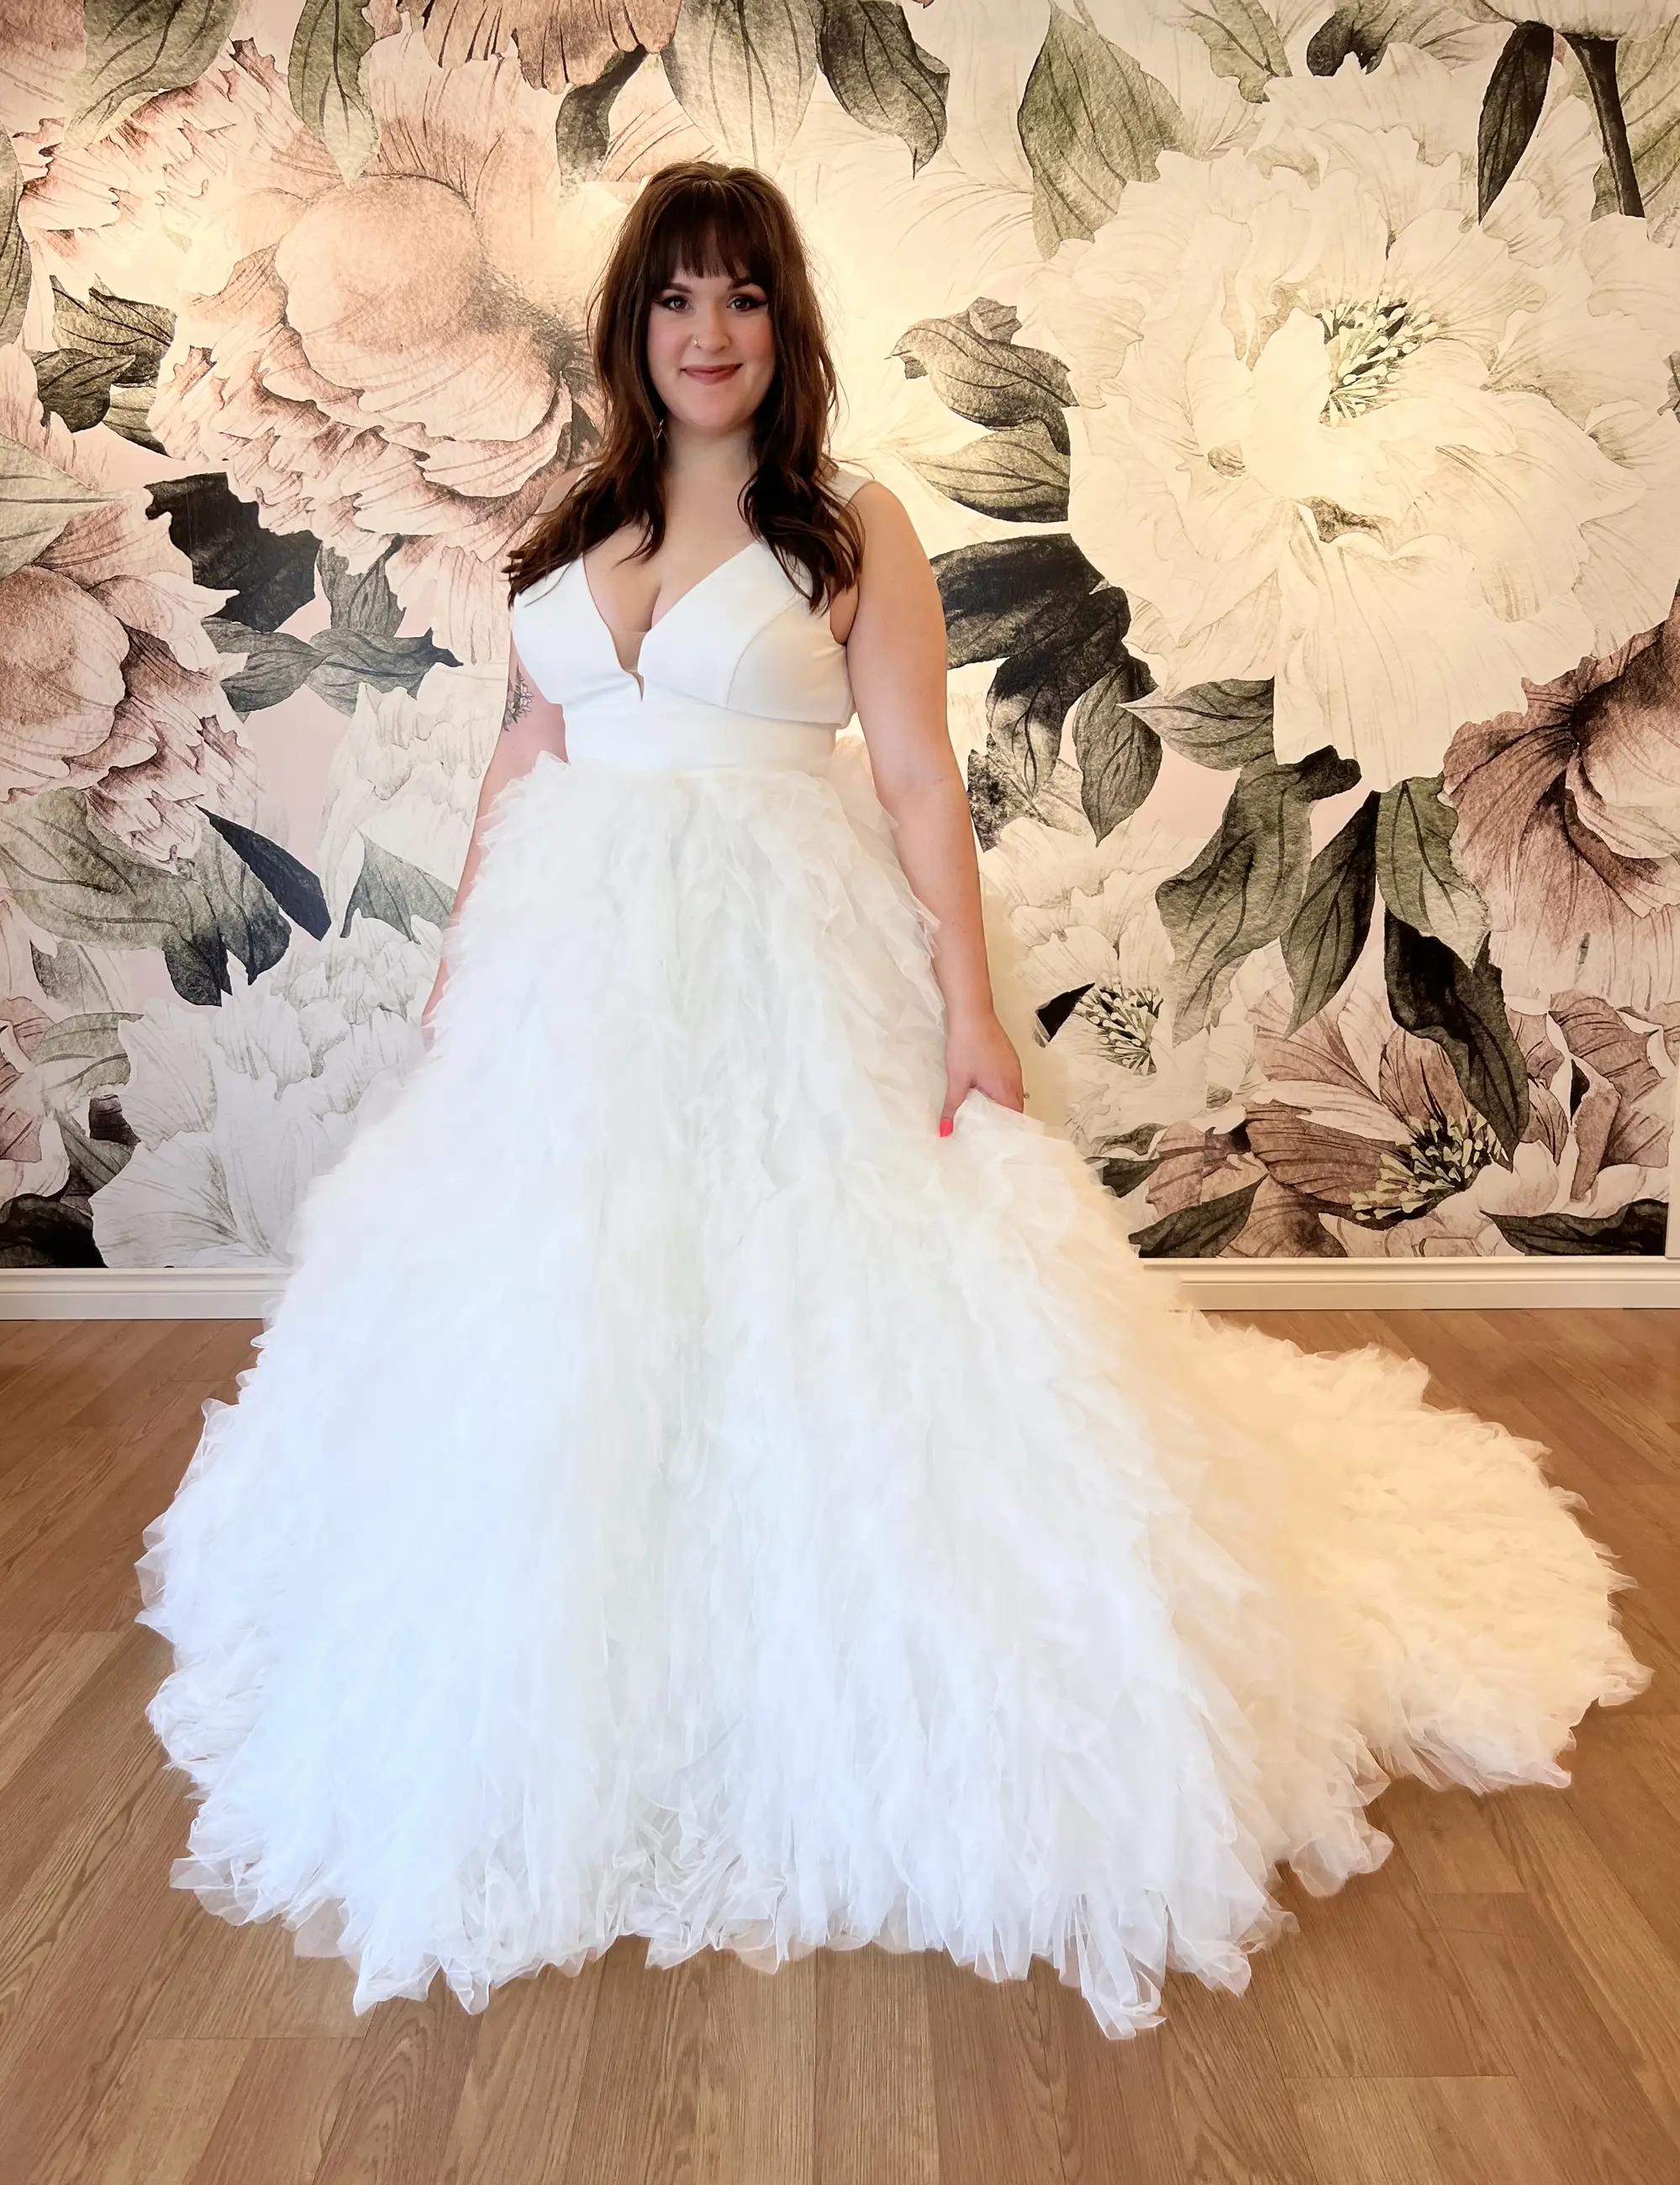 Ruffle Skirt Ball Gown Wedding Dress with V-neckline and Dramatic Train